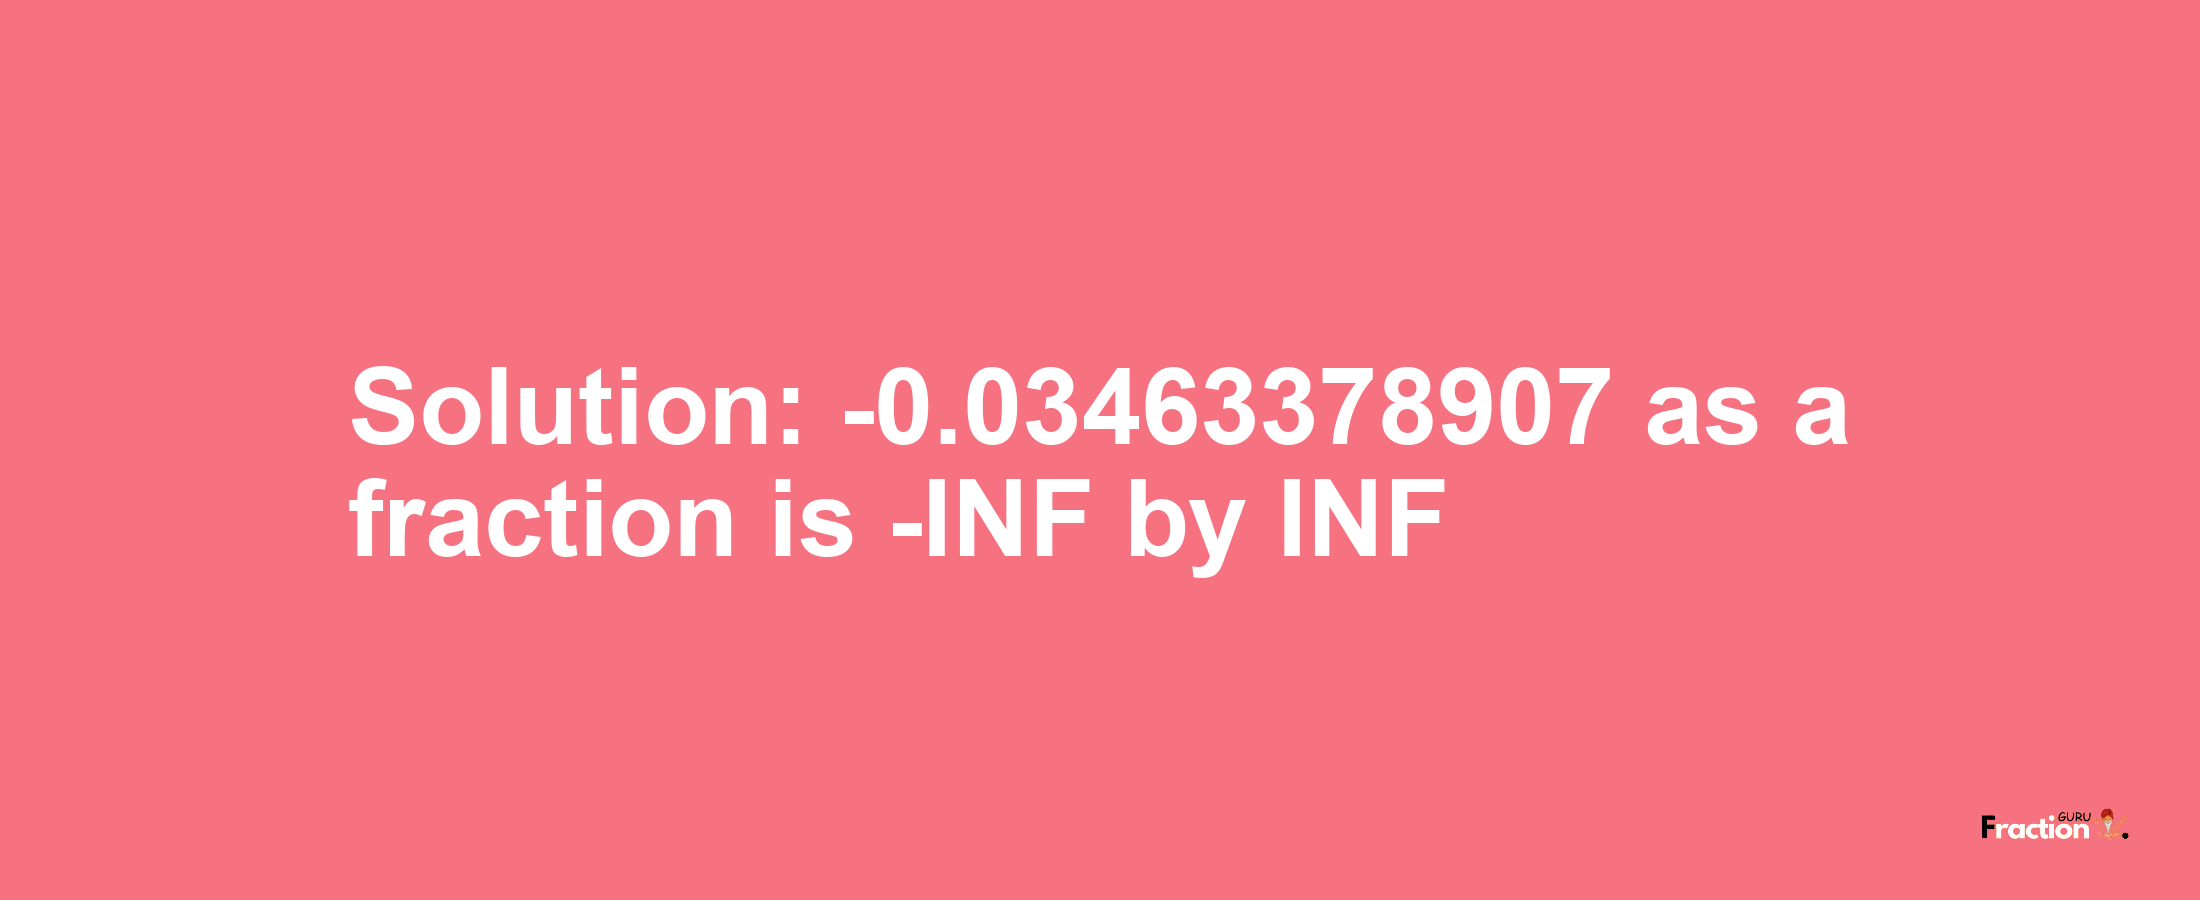 Solution:-0.03463378907 as a fraction is -INF/INF